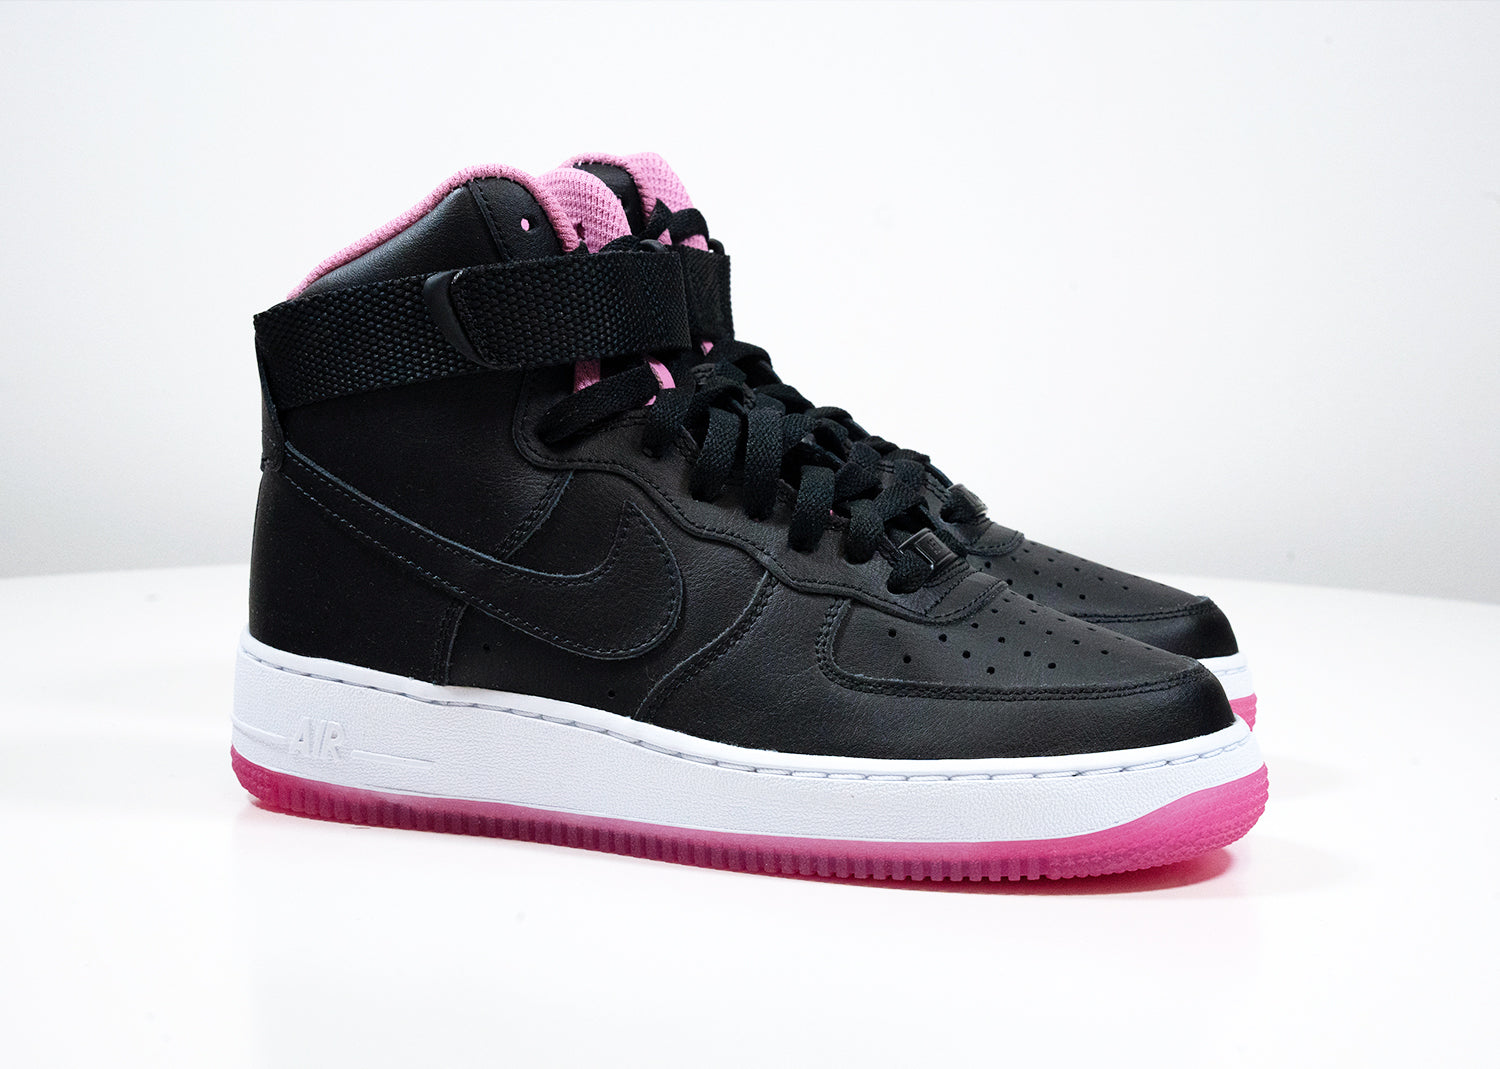 Second Chance - sail nike Air Force 1 High ID Black/pink - 38,5 | NEW